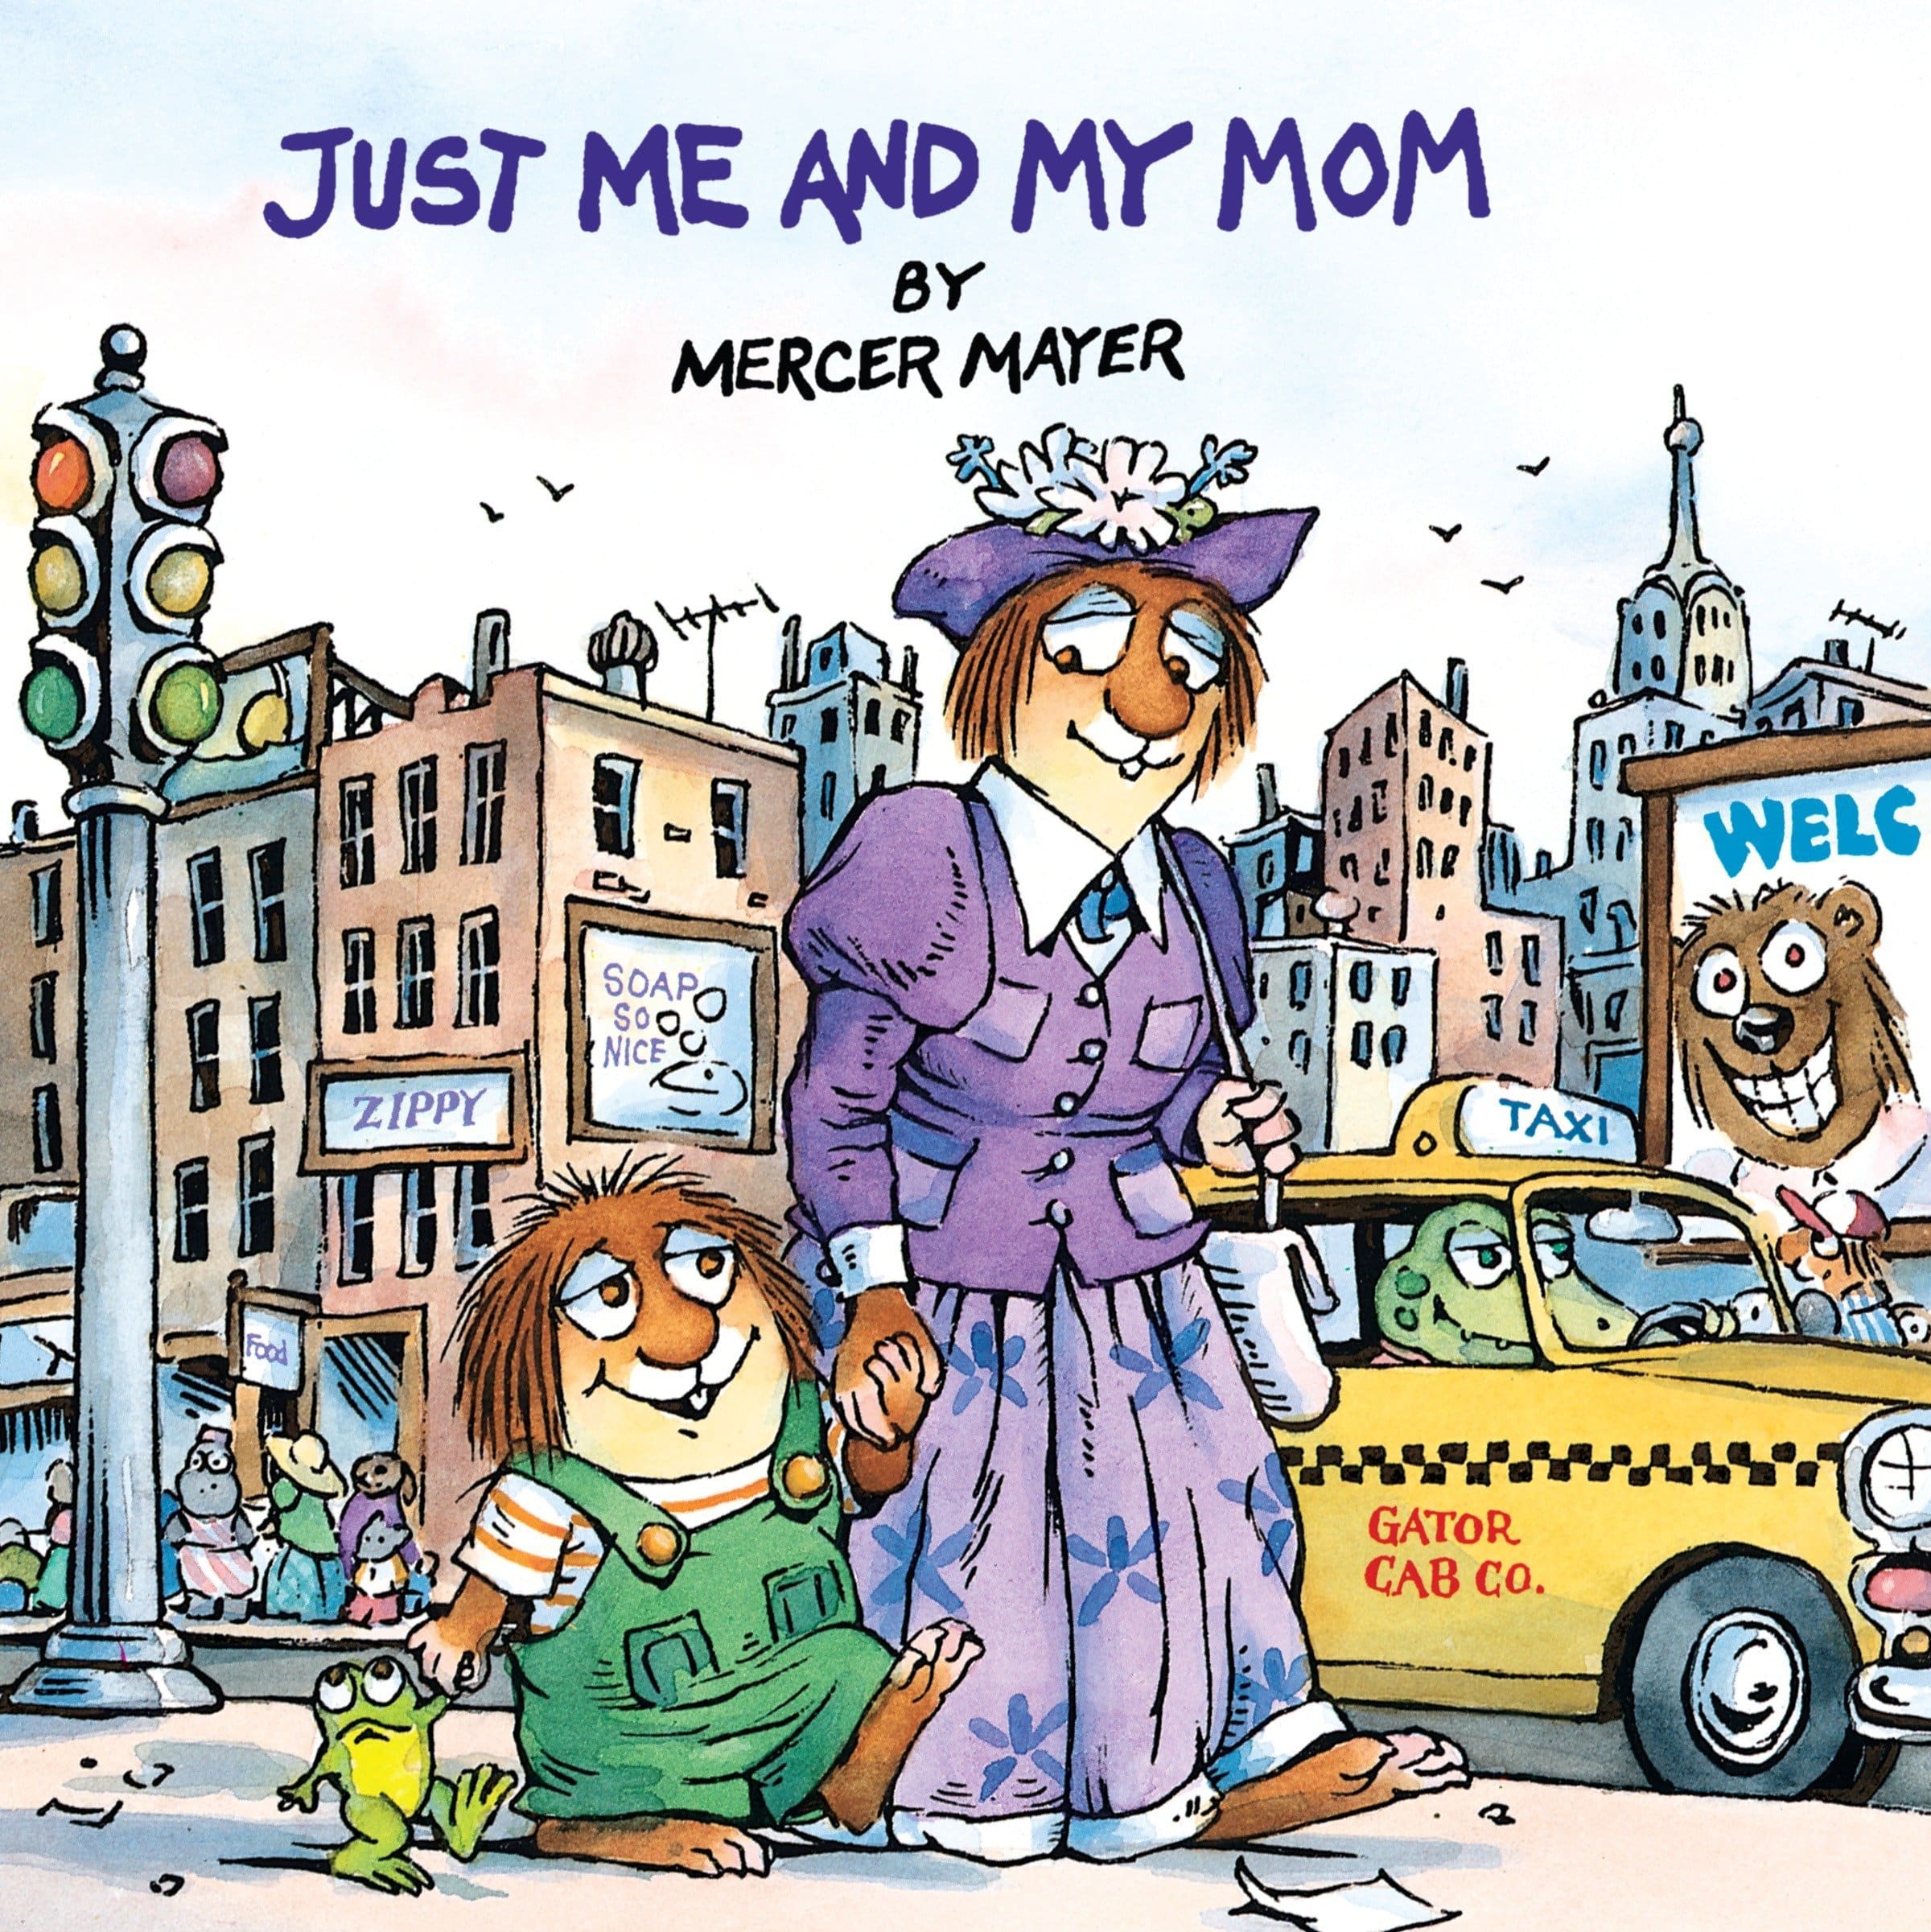 The cover for the book Just Me and My Mom